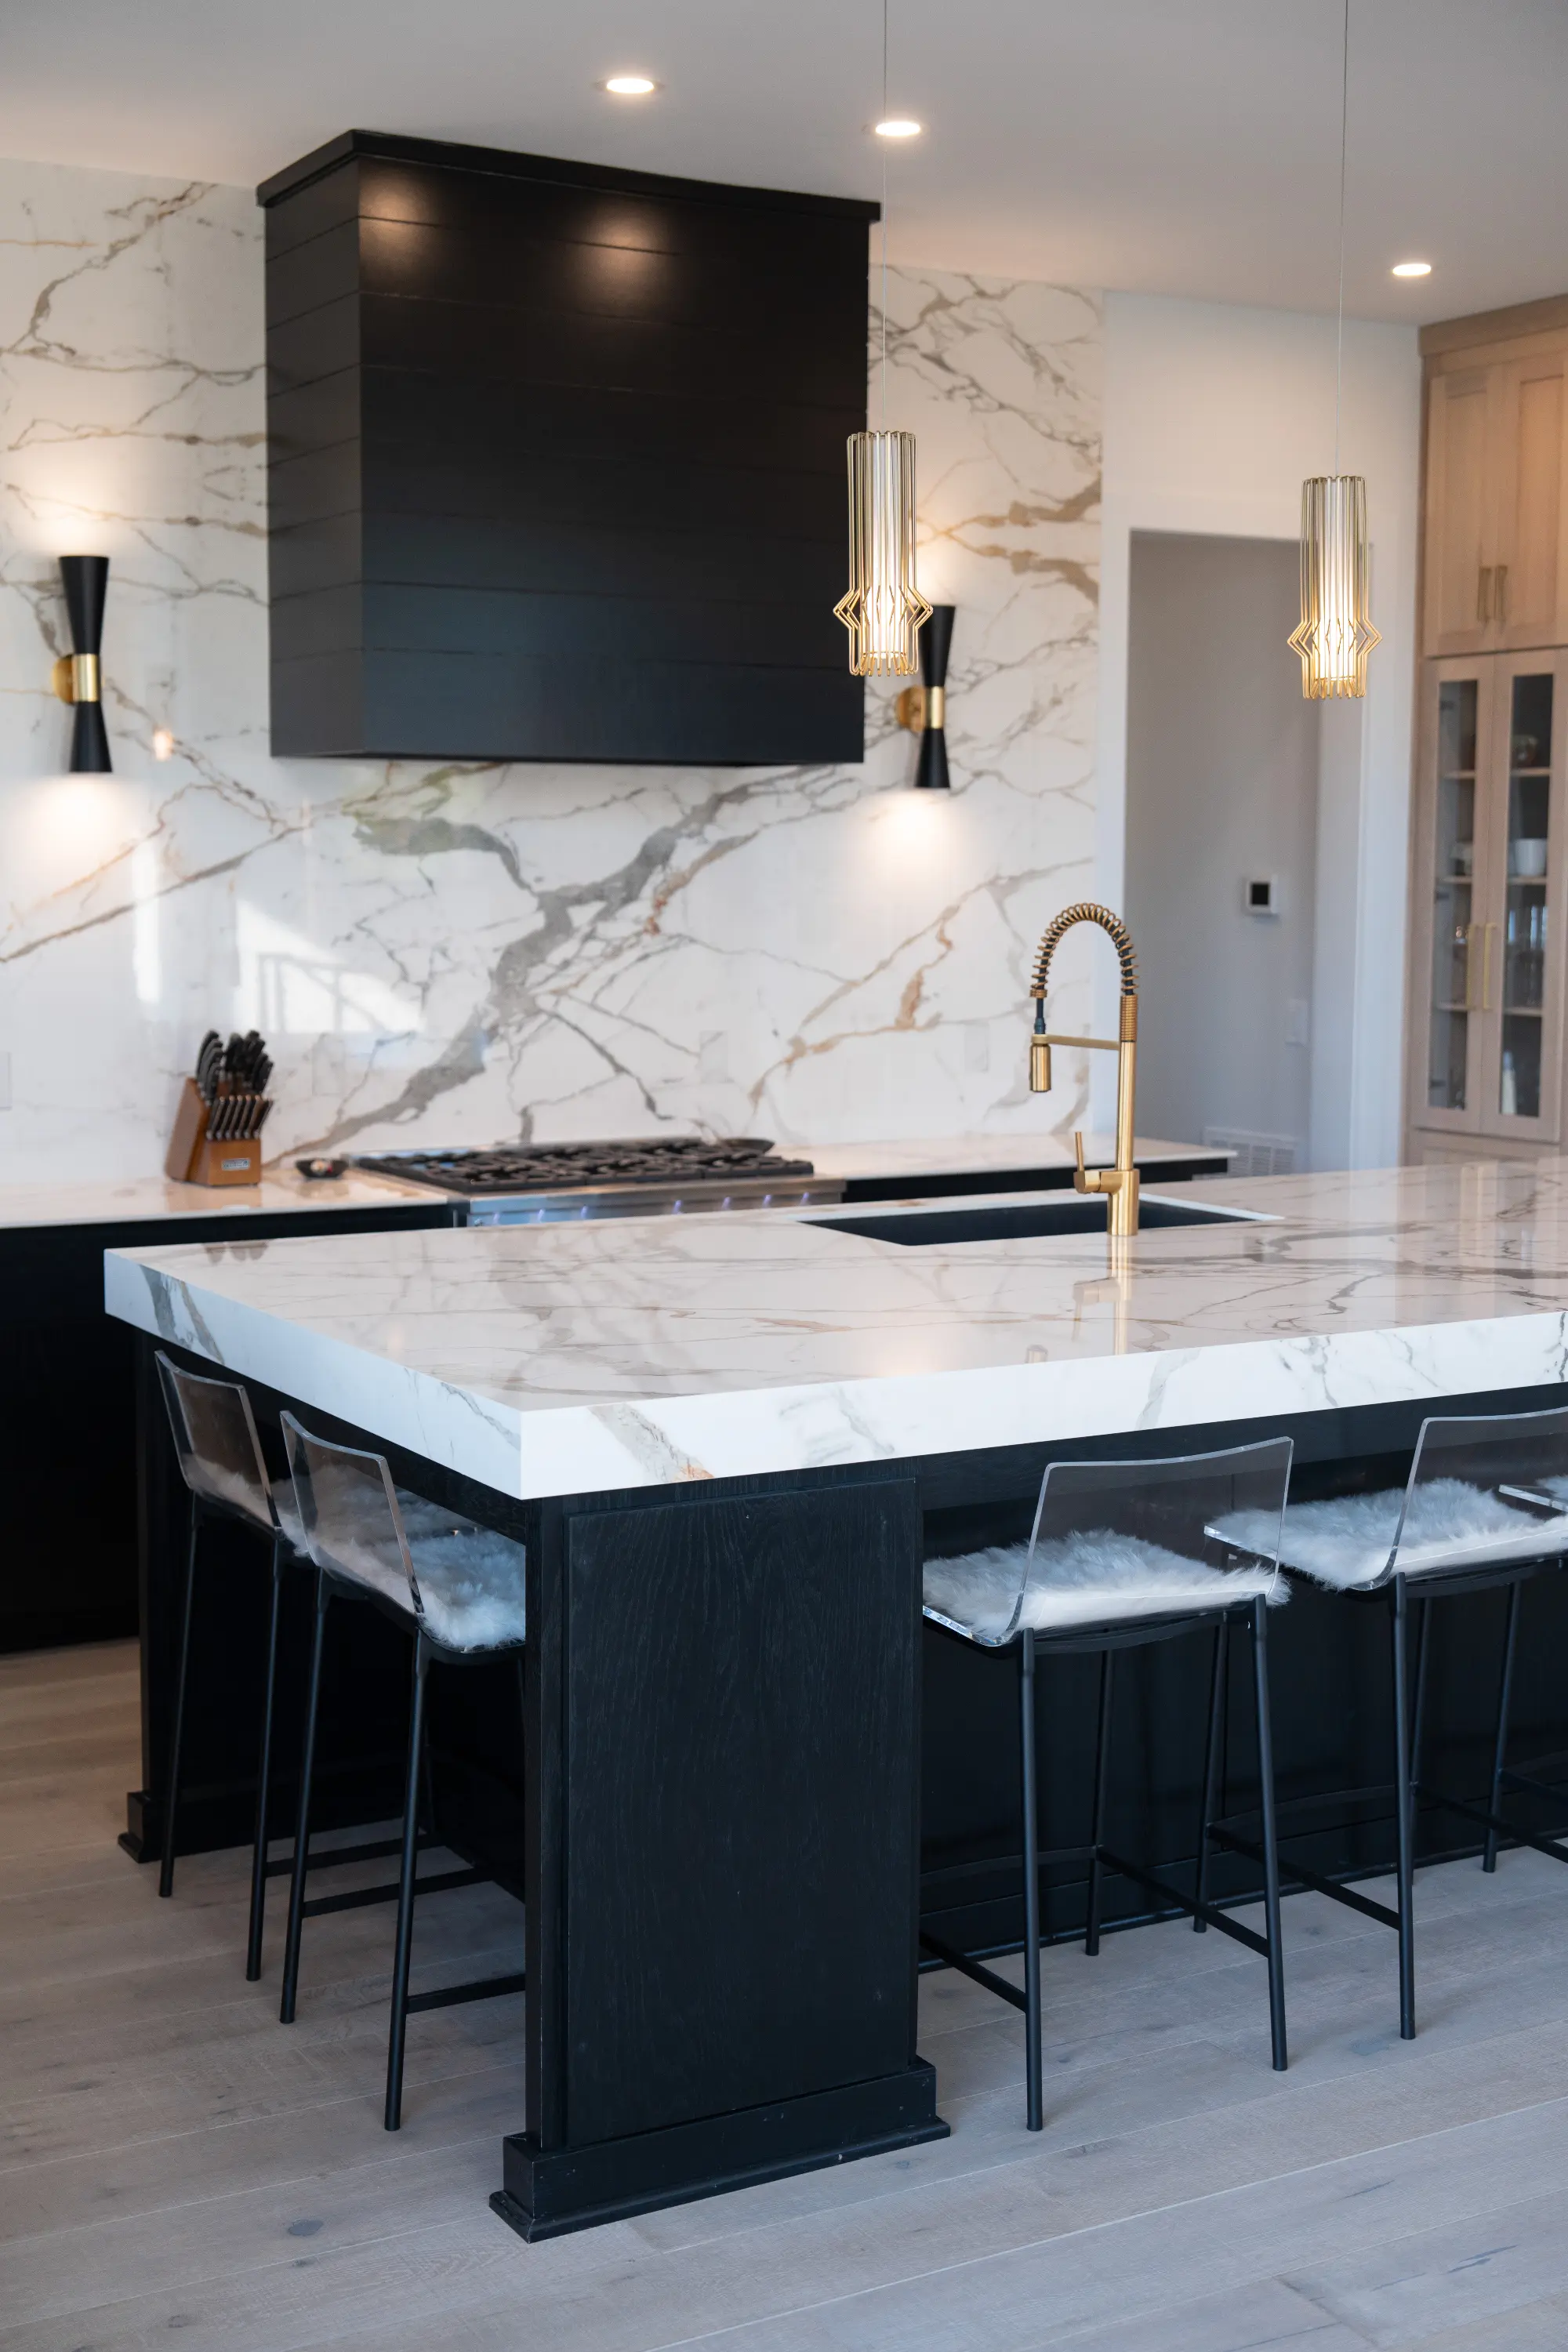 Latest Trends in Porcelain | Capitol Design Group